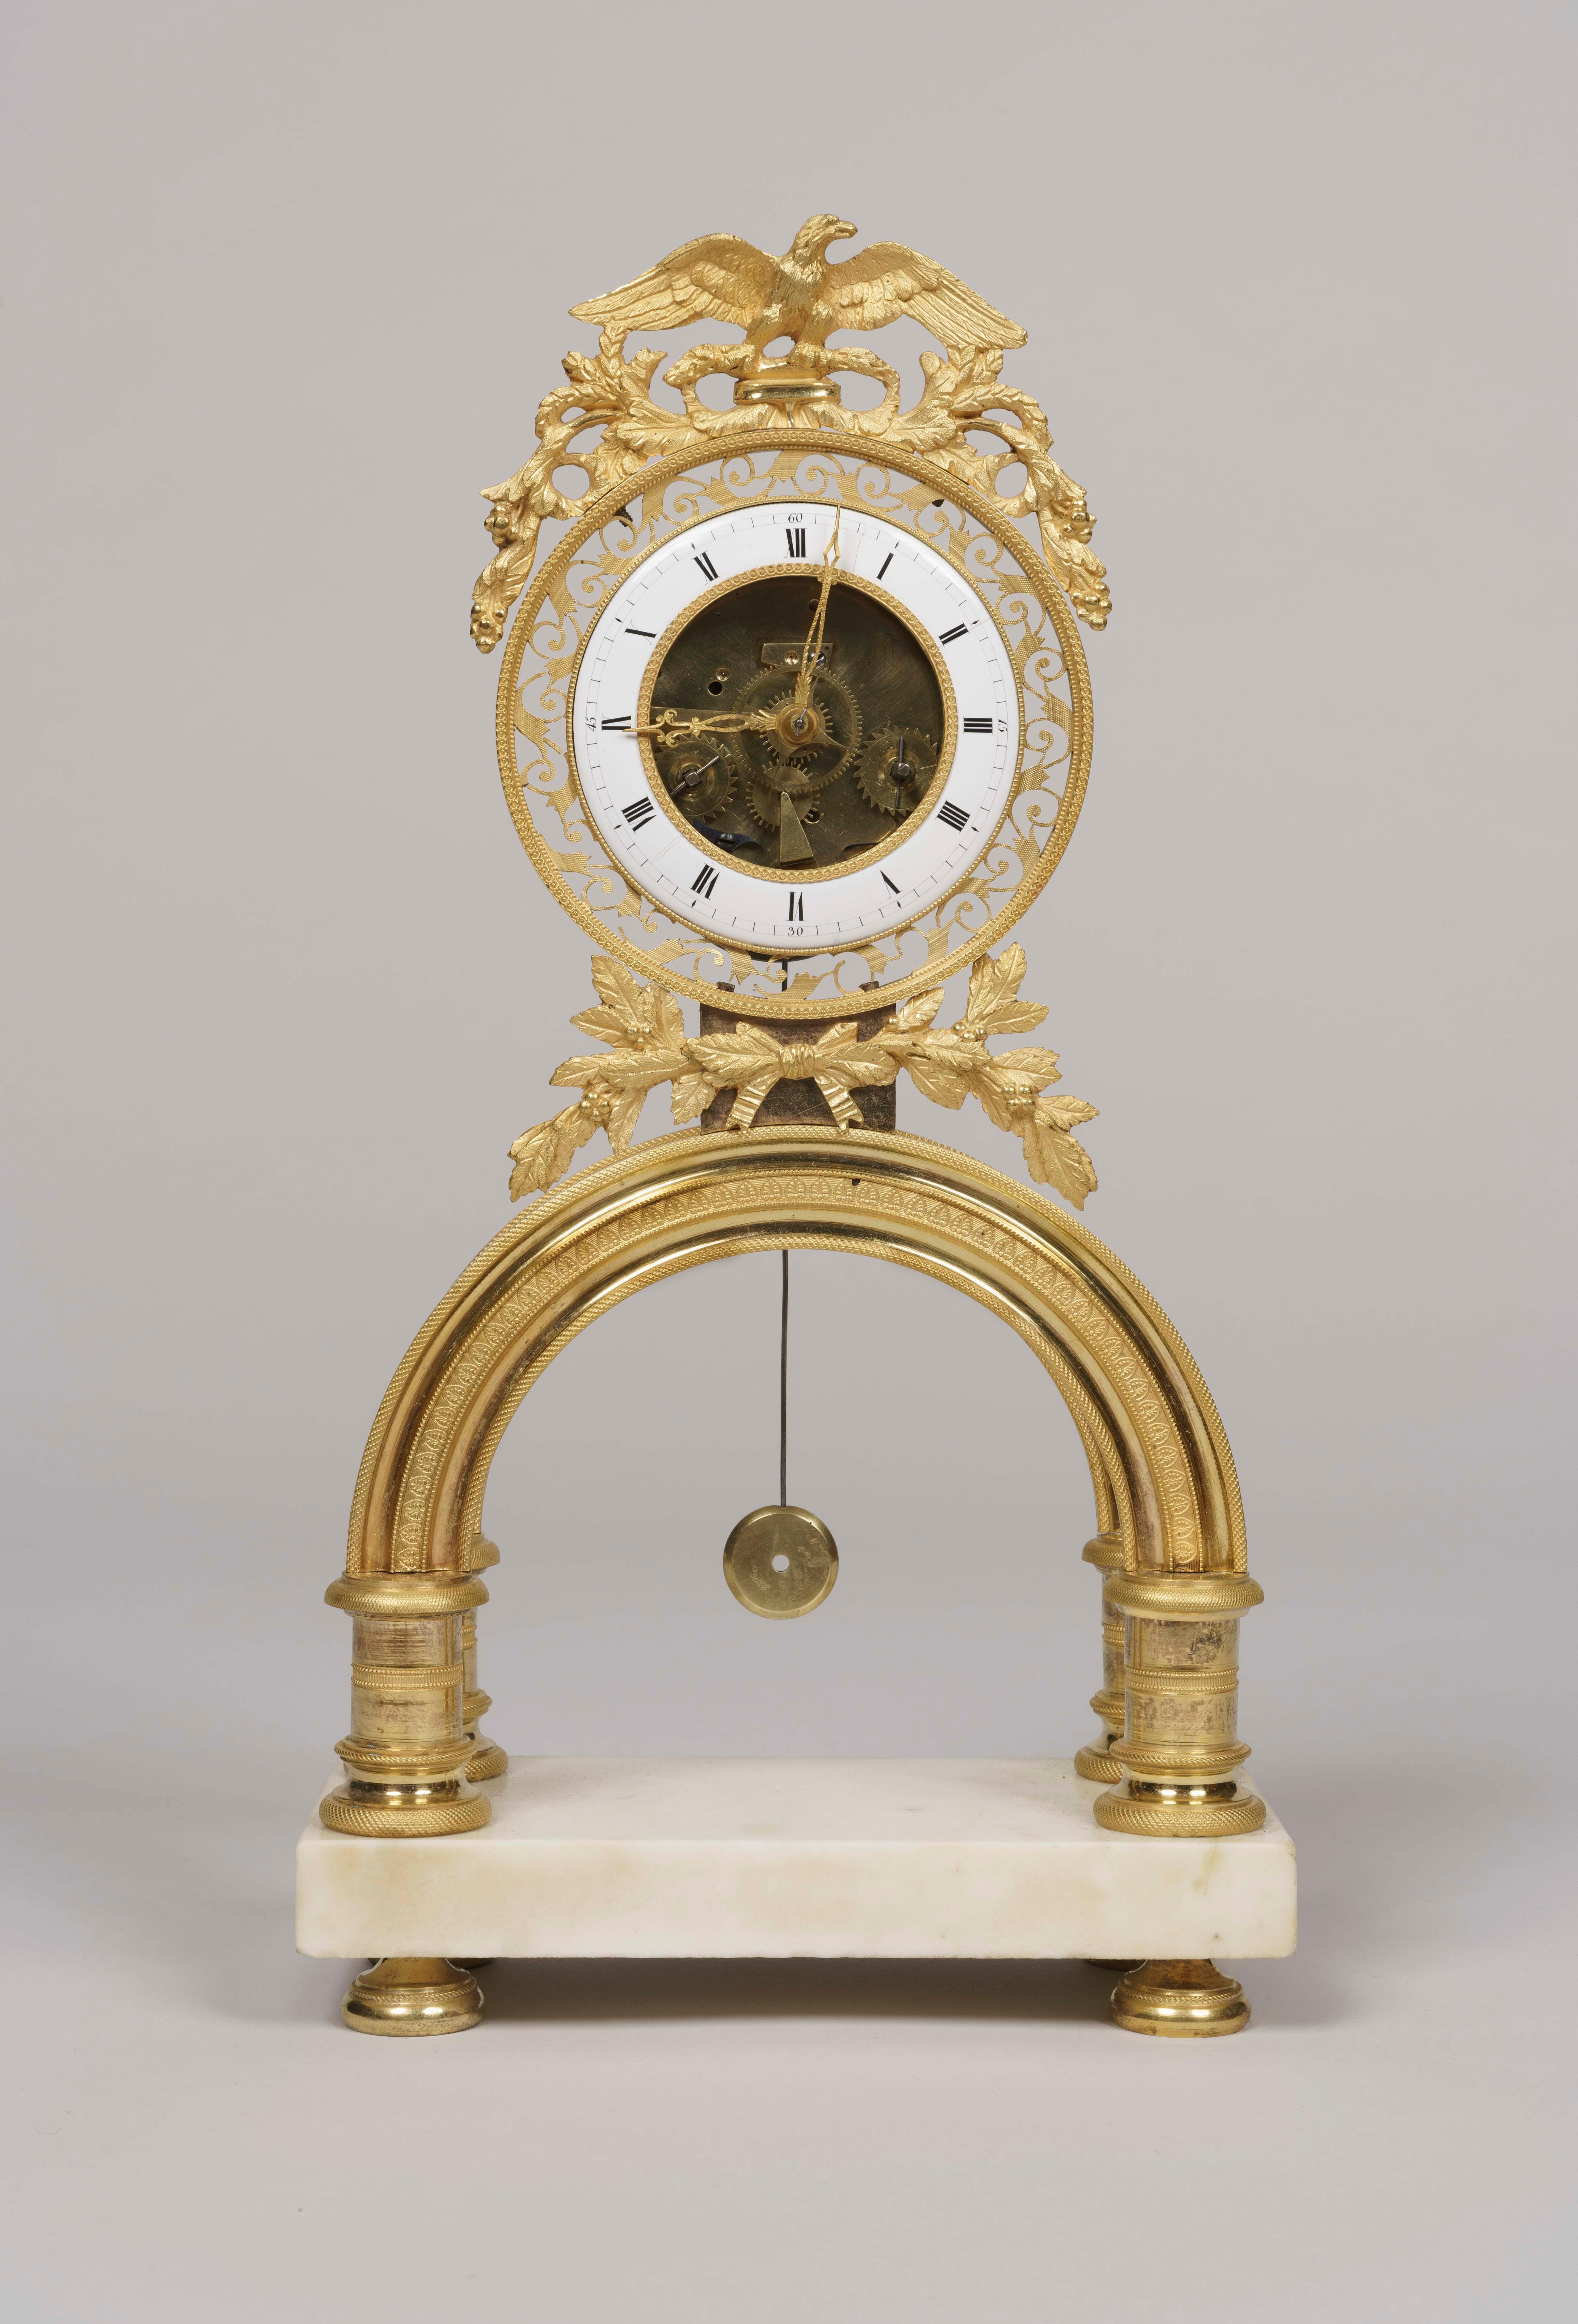 A symbolic skeleton clock from the French Directoire period.

A rectangular Carrara marble plinth with bronze toupie feet with knurled decoration supports an ormolu 'arc-de-ciel', with the circular clock over, dressed with garlands; the white enamel